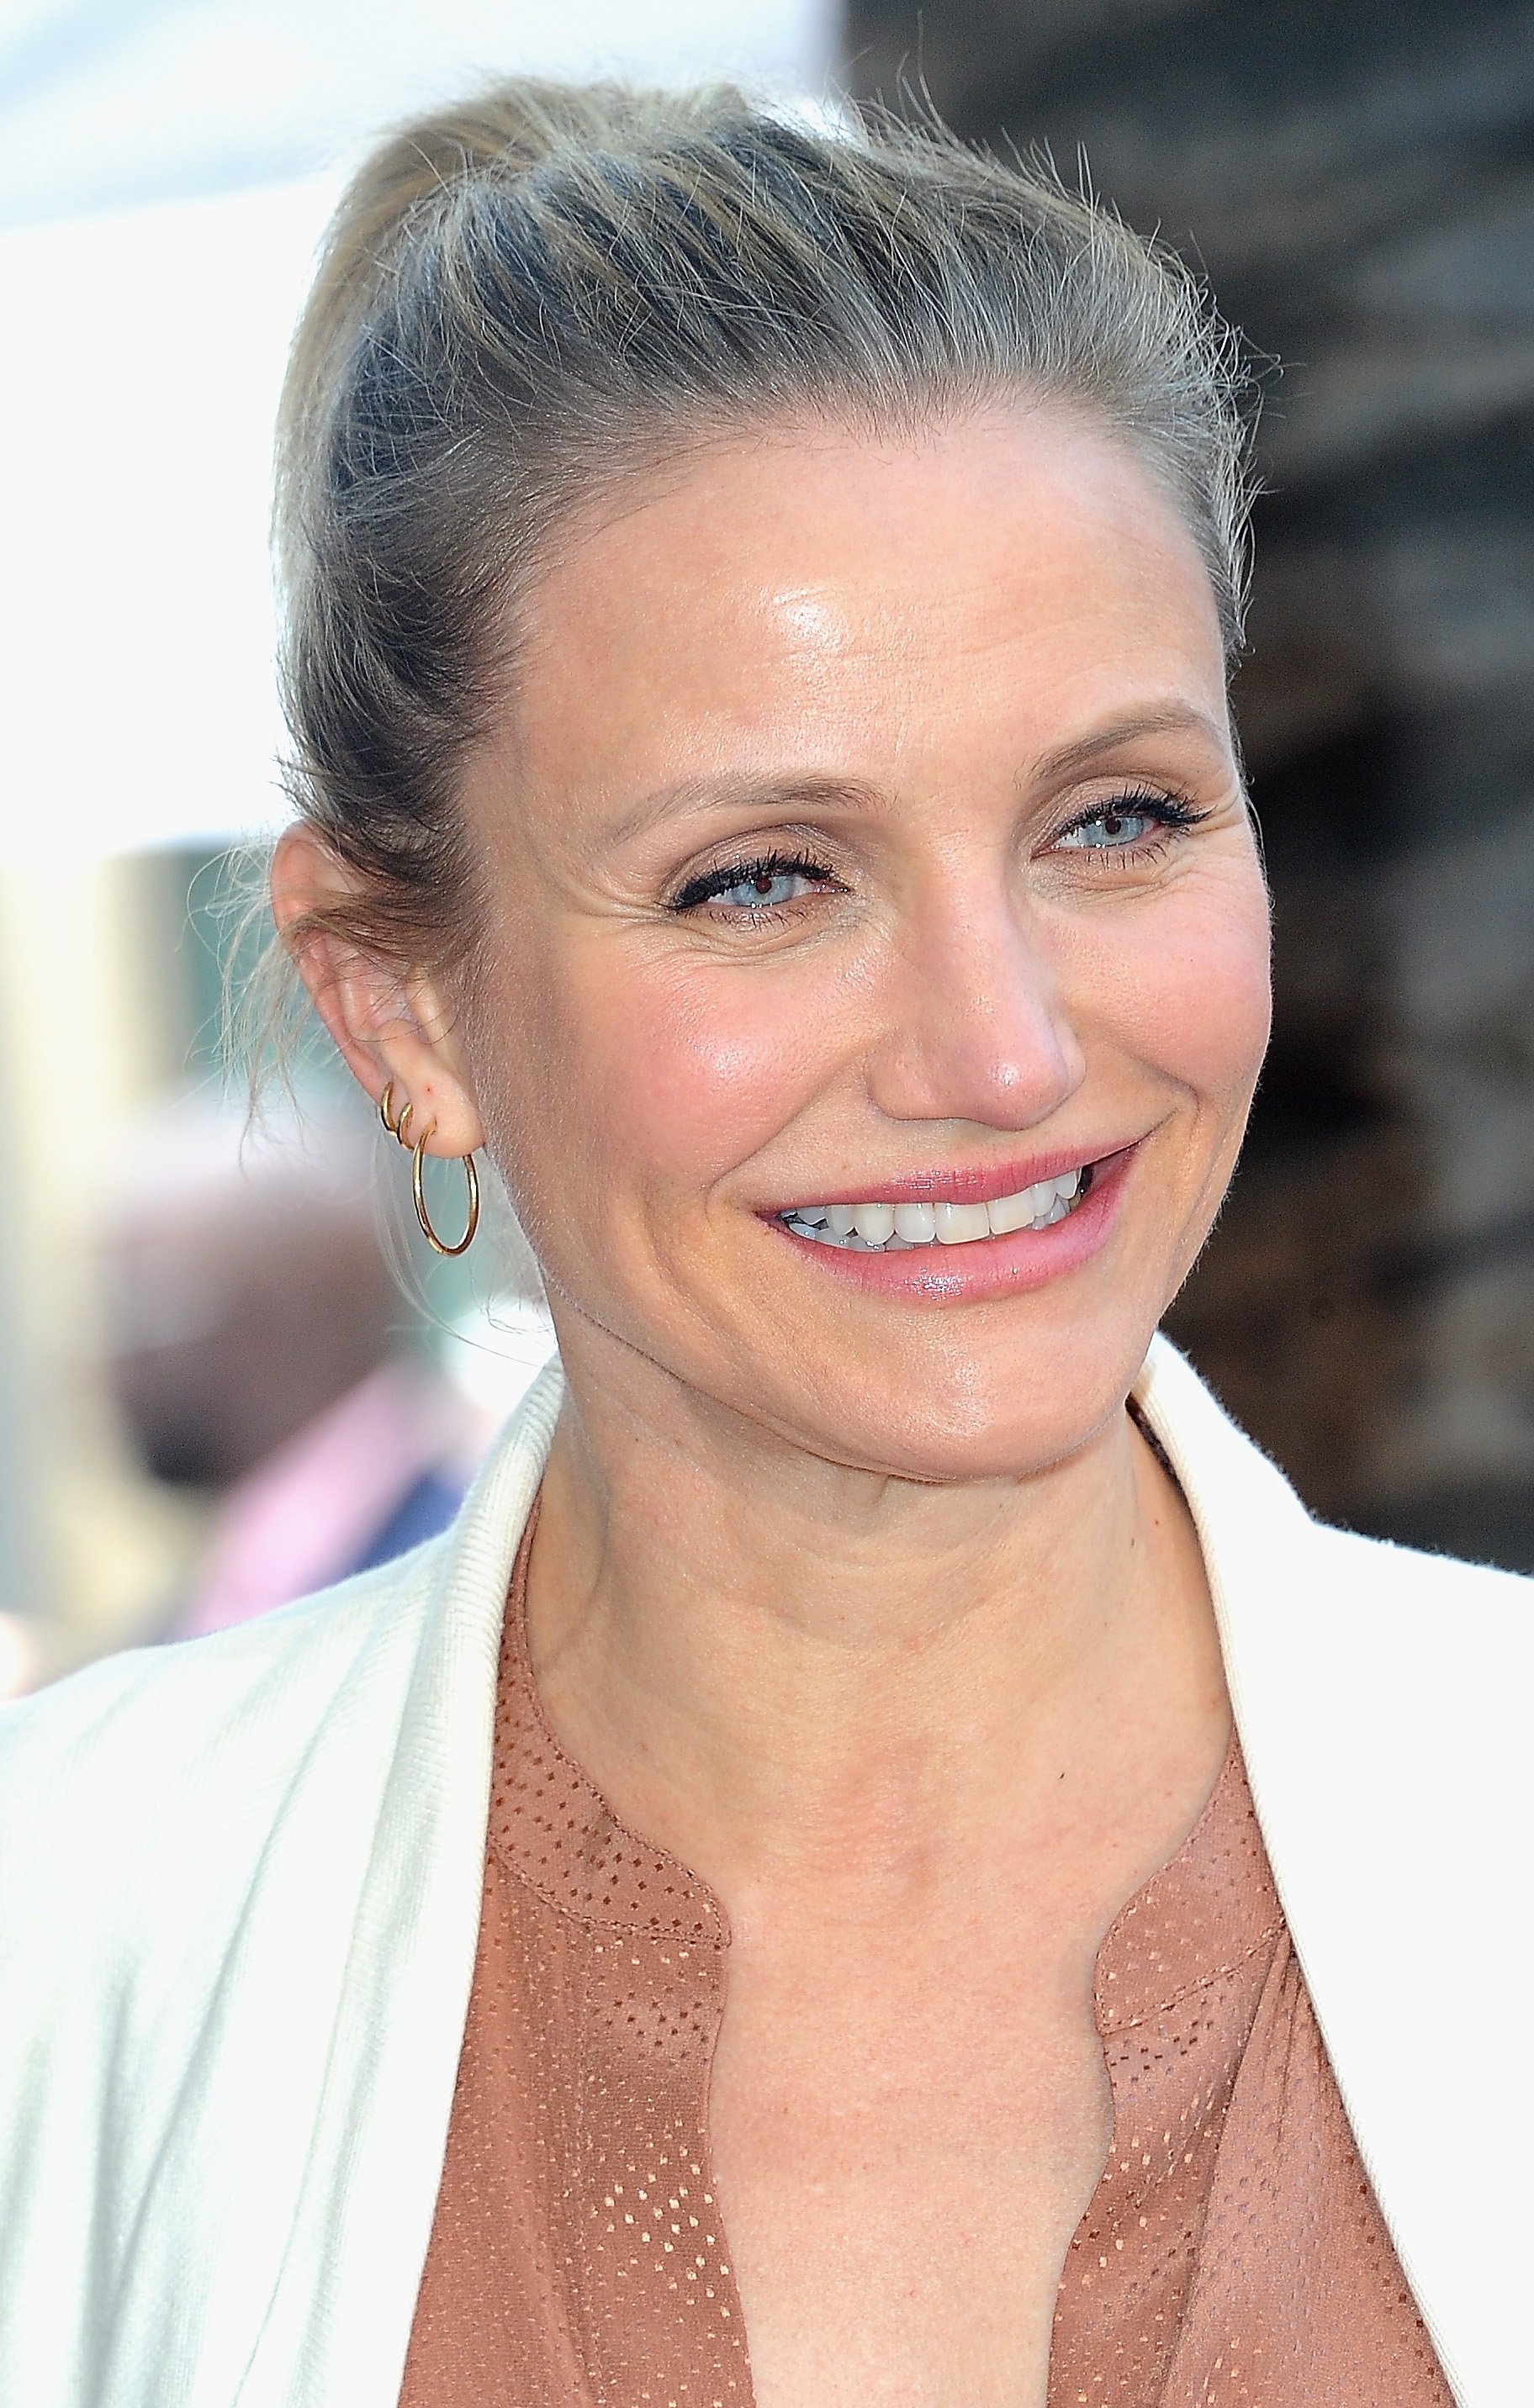 Cameron Diaz supporting Lucy Liu at her Star Ceremony On The Hollywood Walk Of Fame on May 1, 2019 | Source: Getty Images